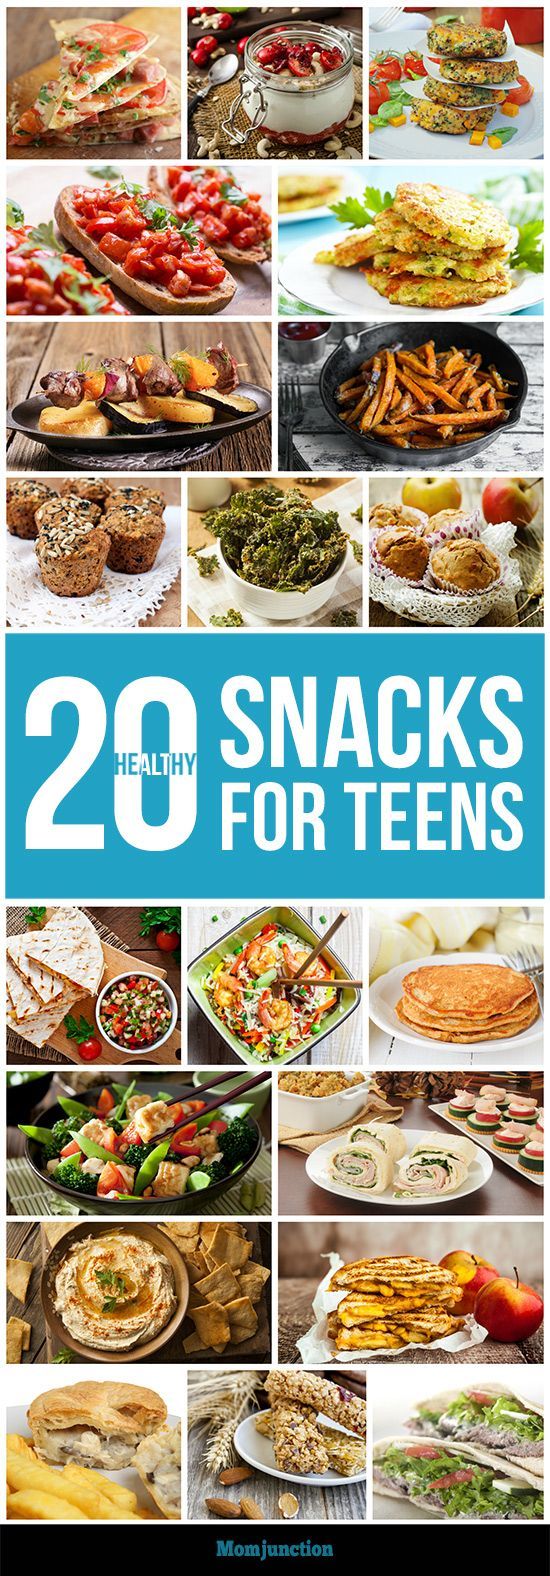 20 Easy And Healthy Snacks For Teens: Getting teens to skip empty calories is not as difficult as you think. You just need a few